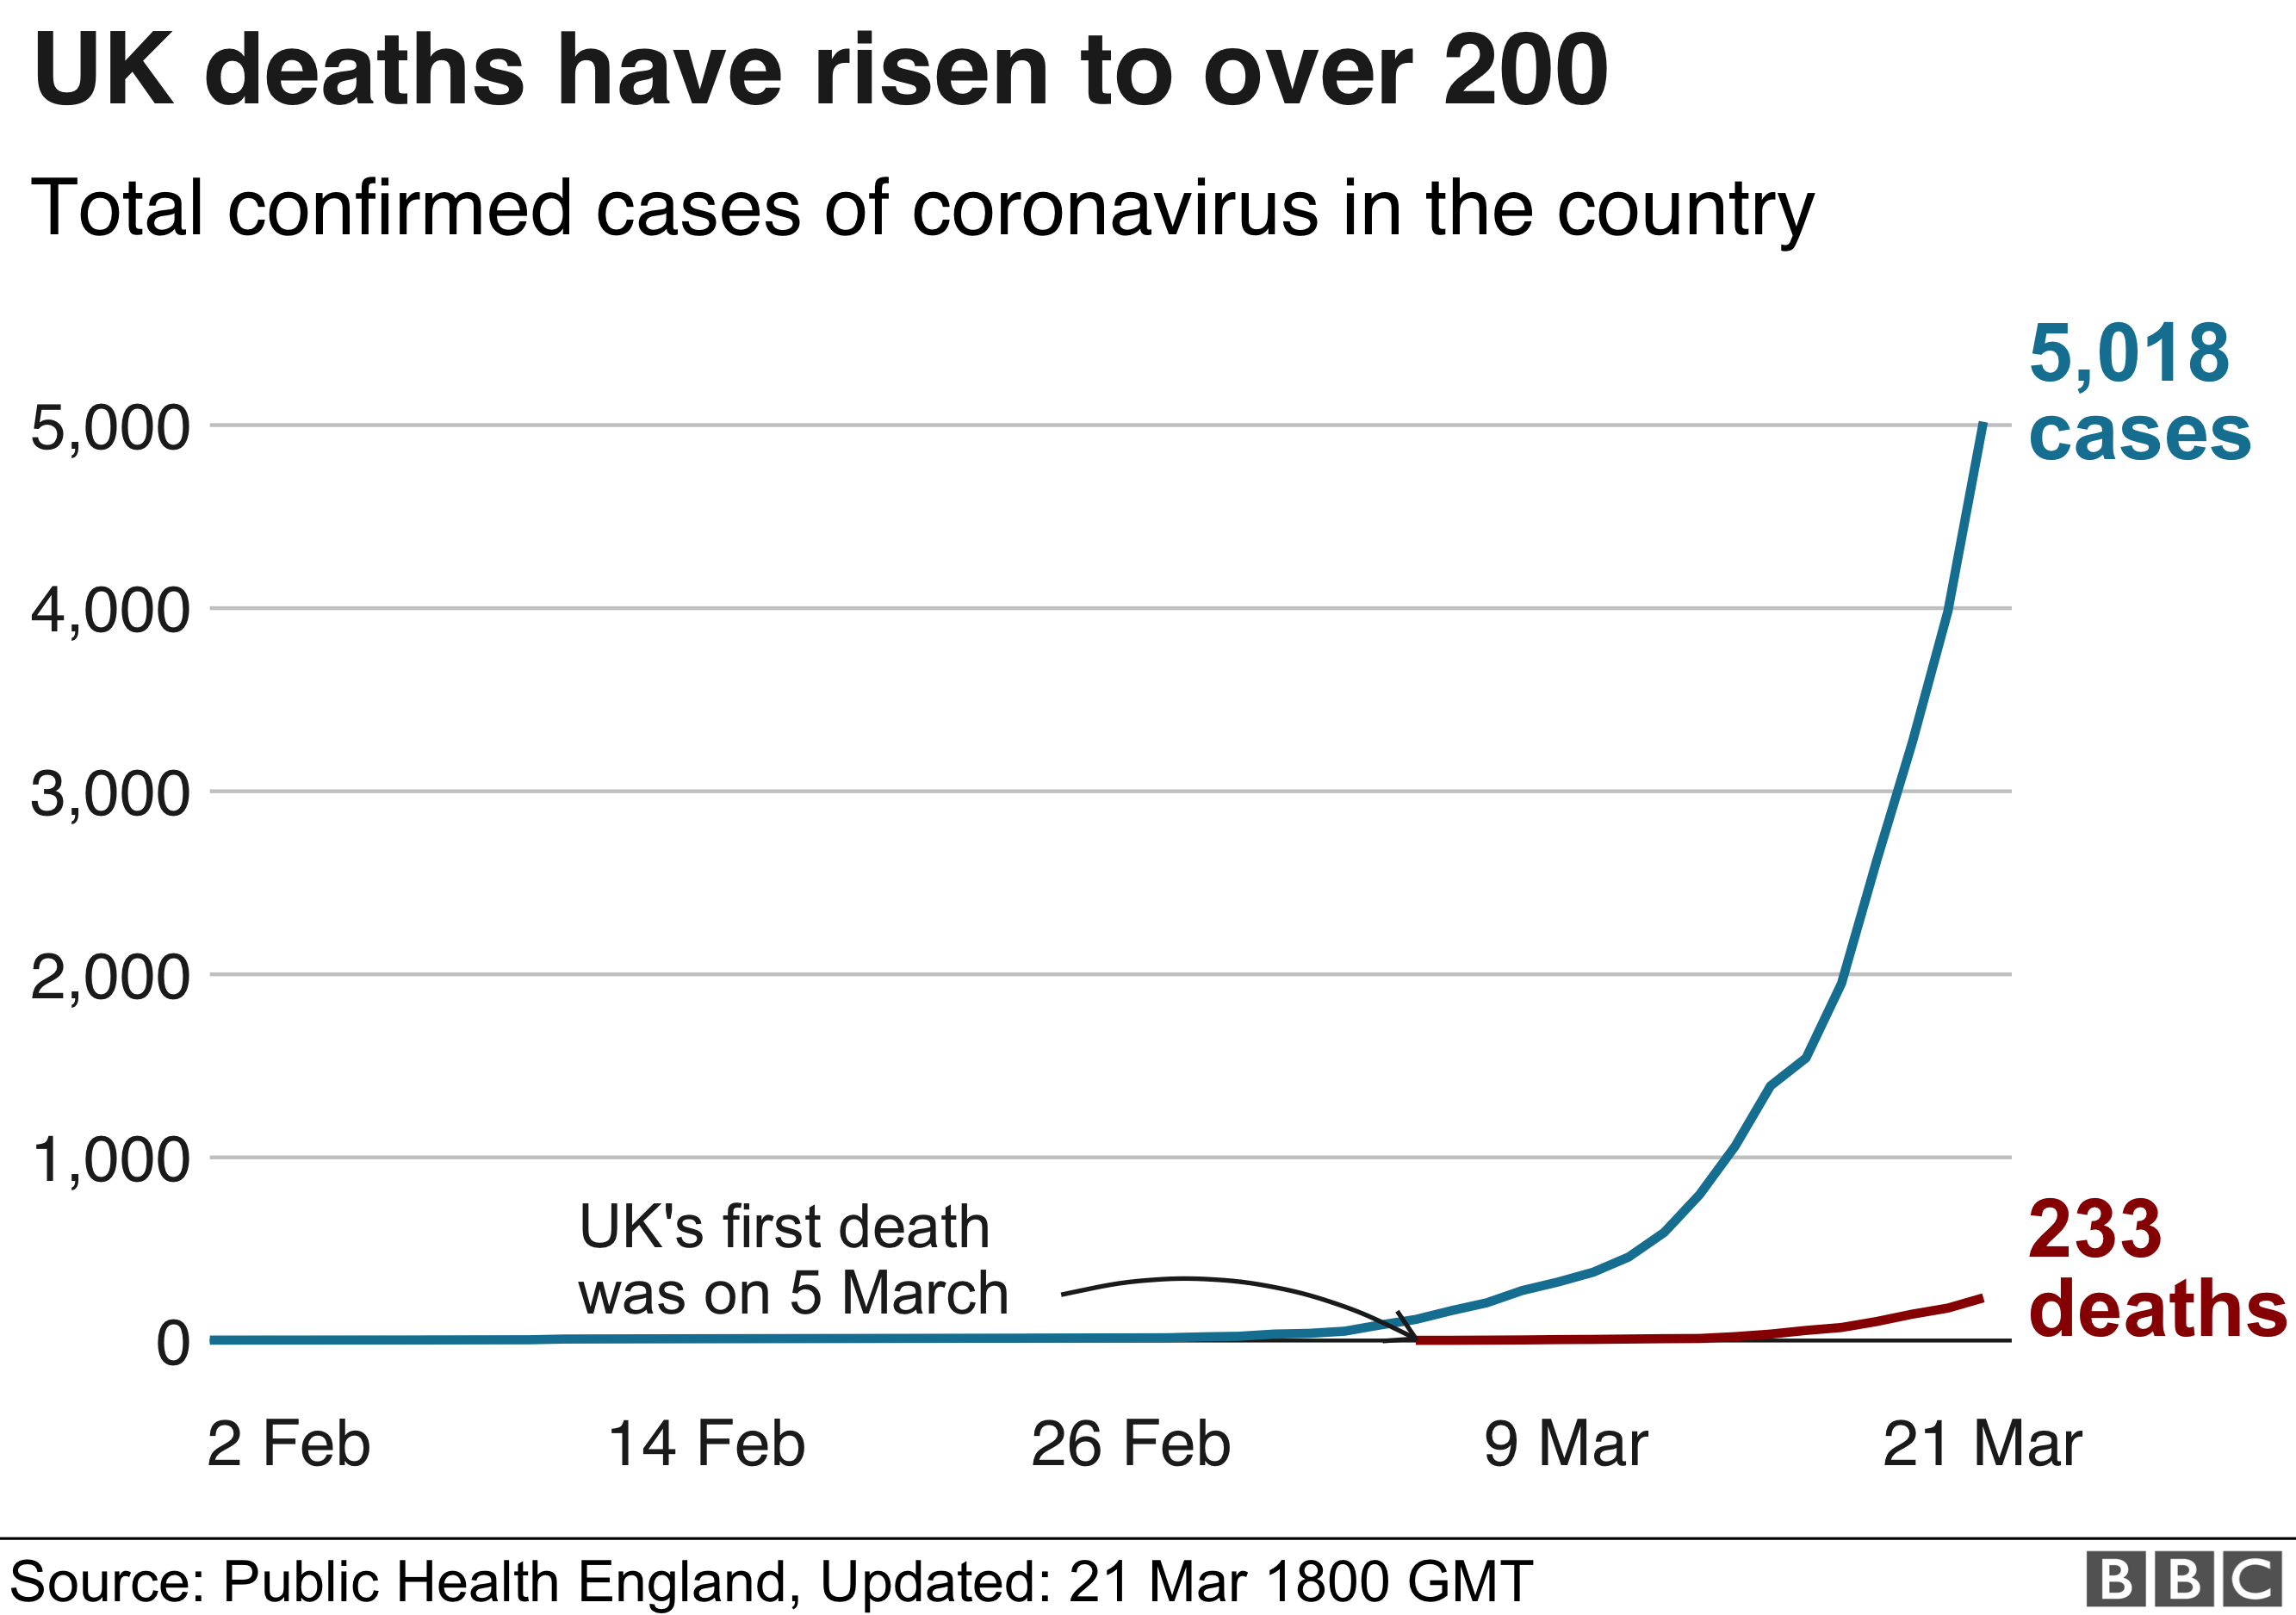 UK deaths and cases chart